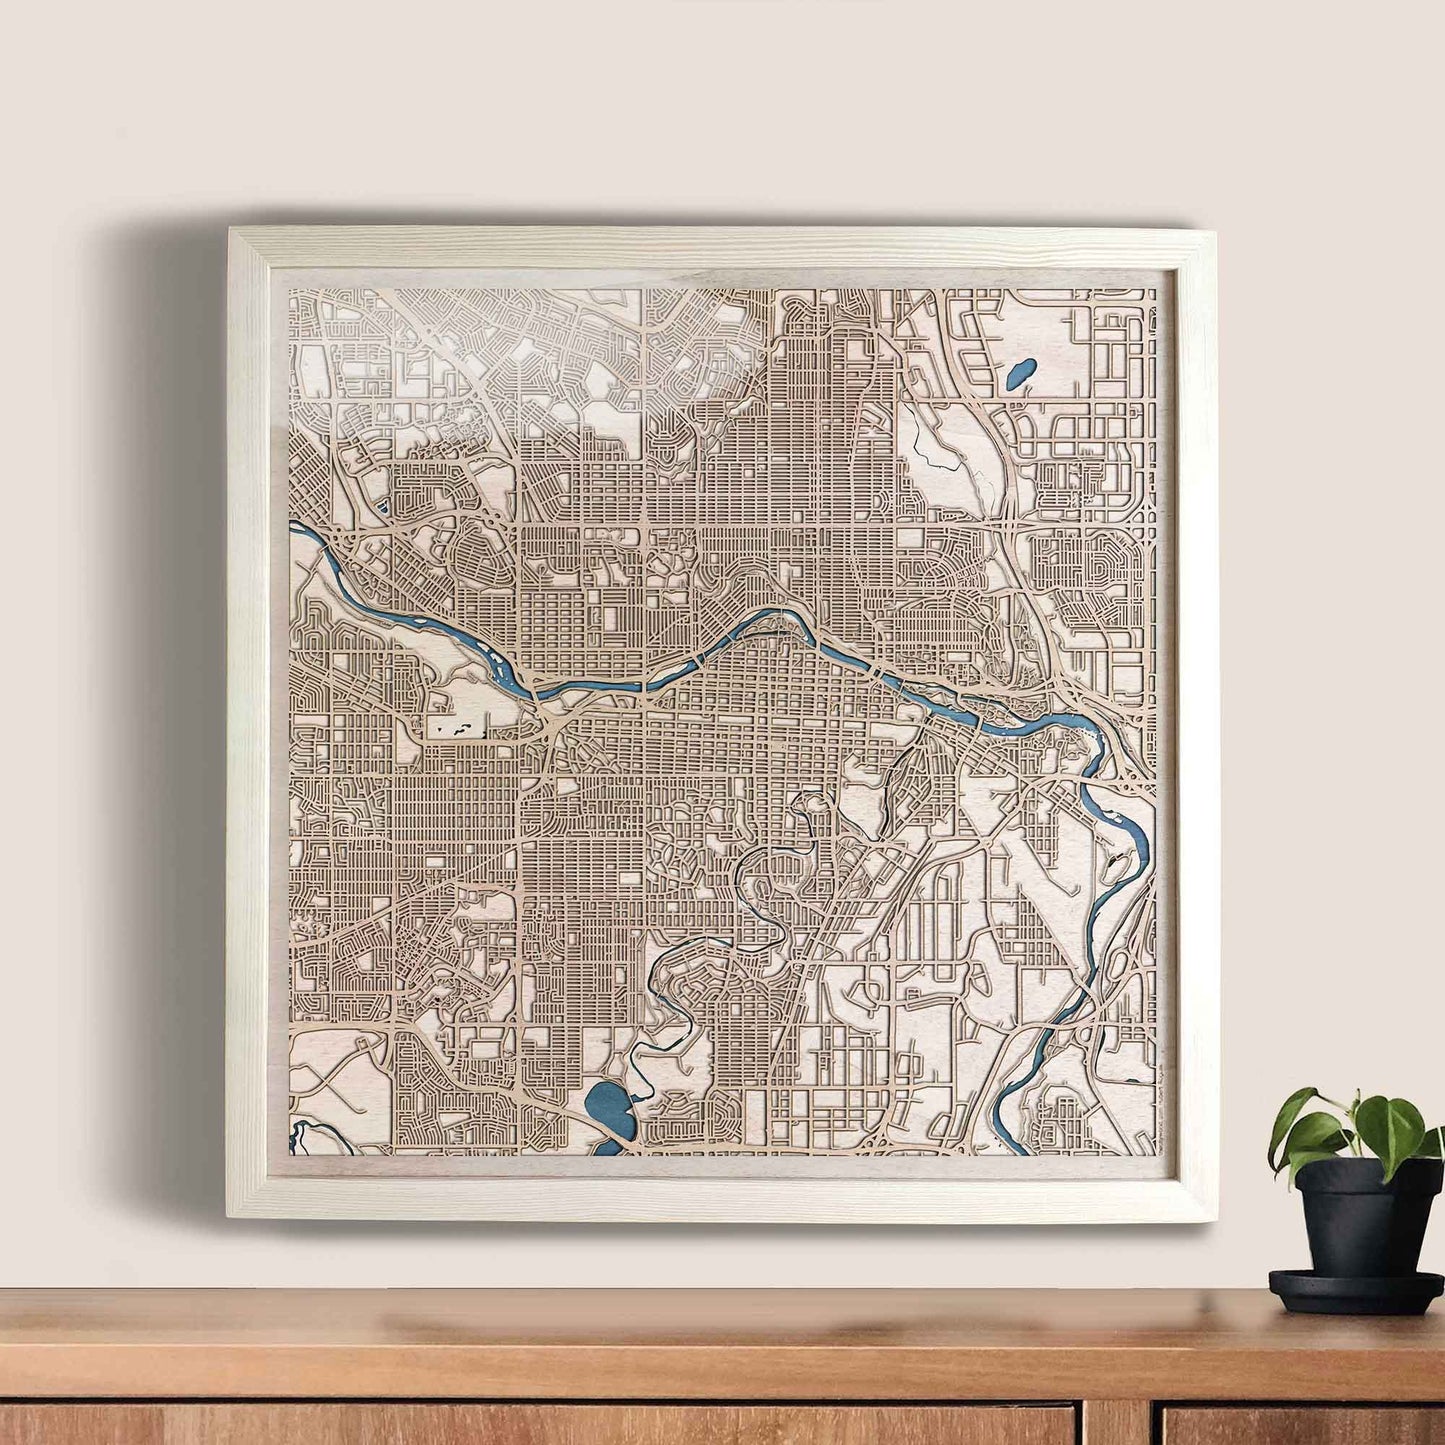 Calgary Wooden Map by CityWood - Custom Wood Map Art - Unique Laser Cut Engraved - Anniversary Gift